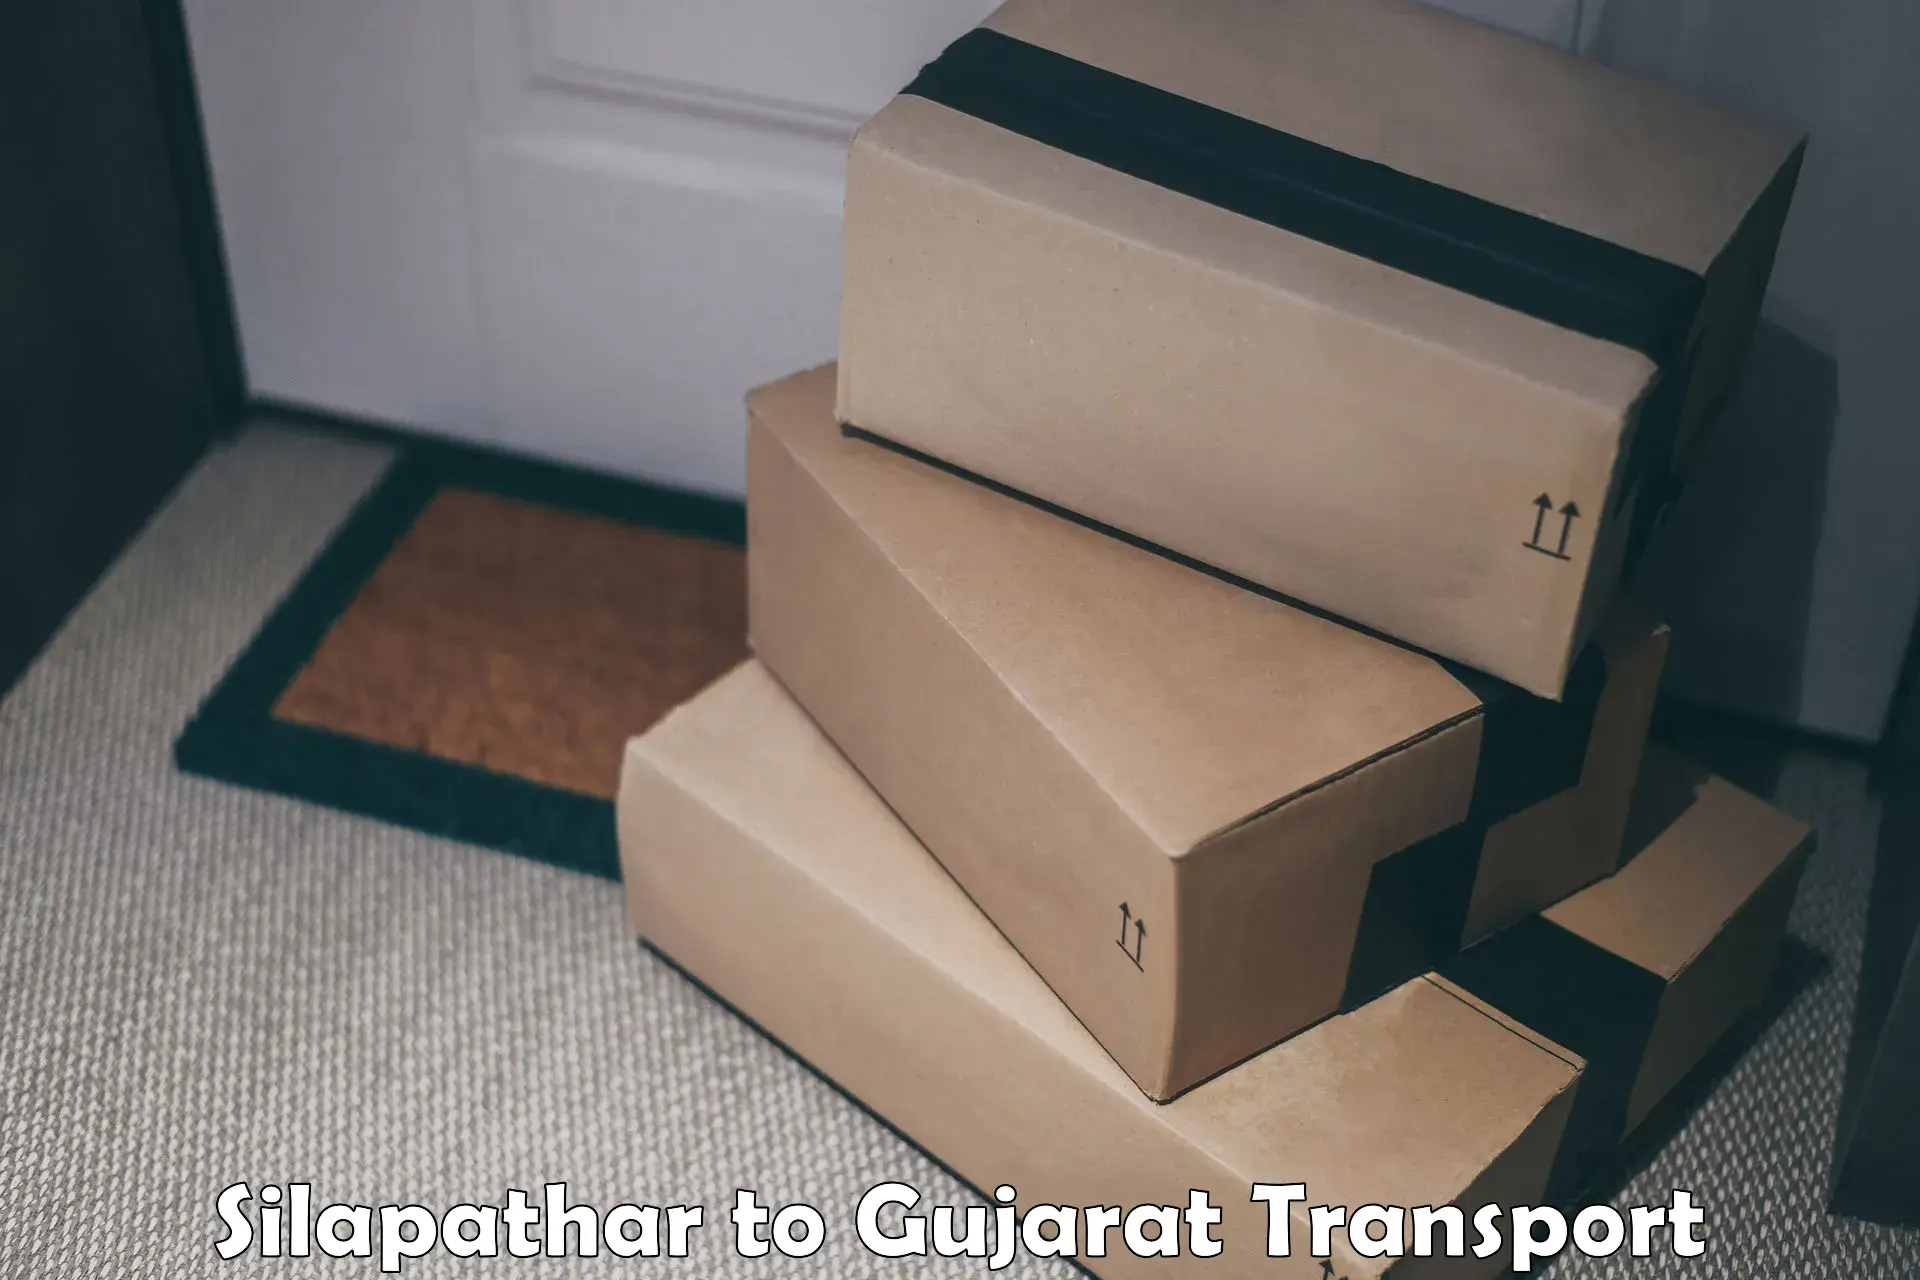 Container transport service Silapathar to Dhasa